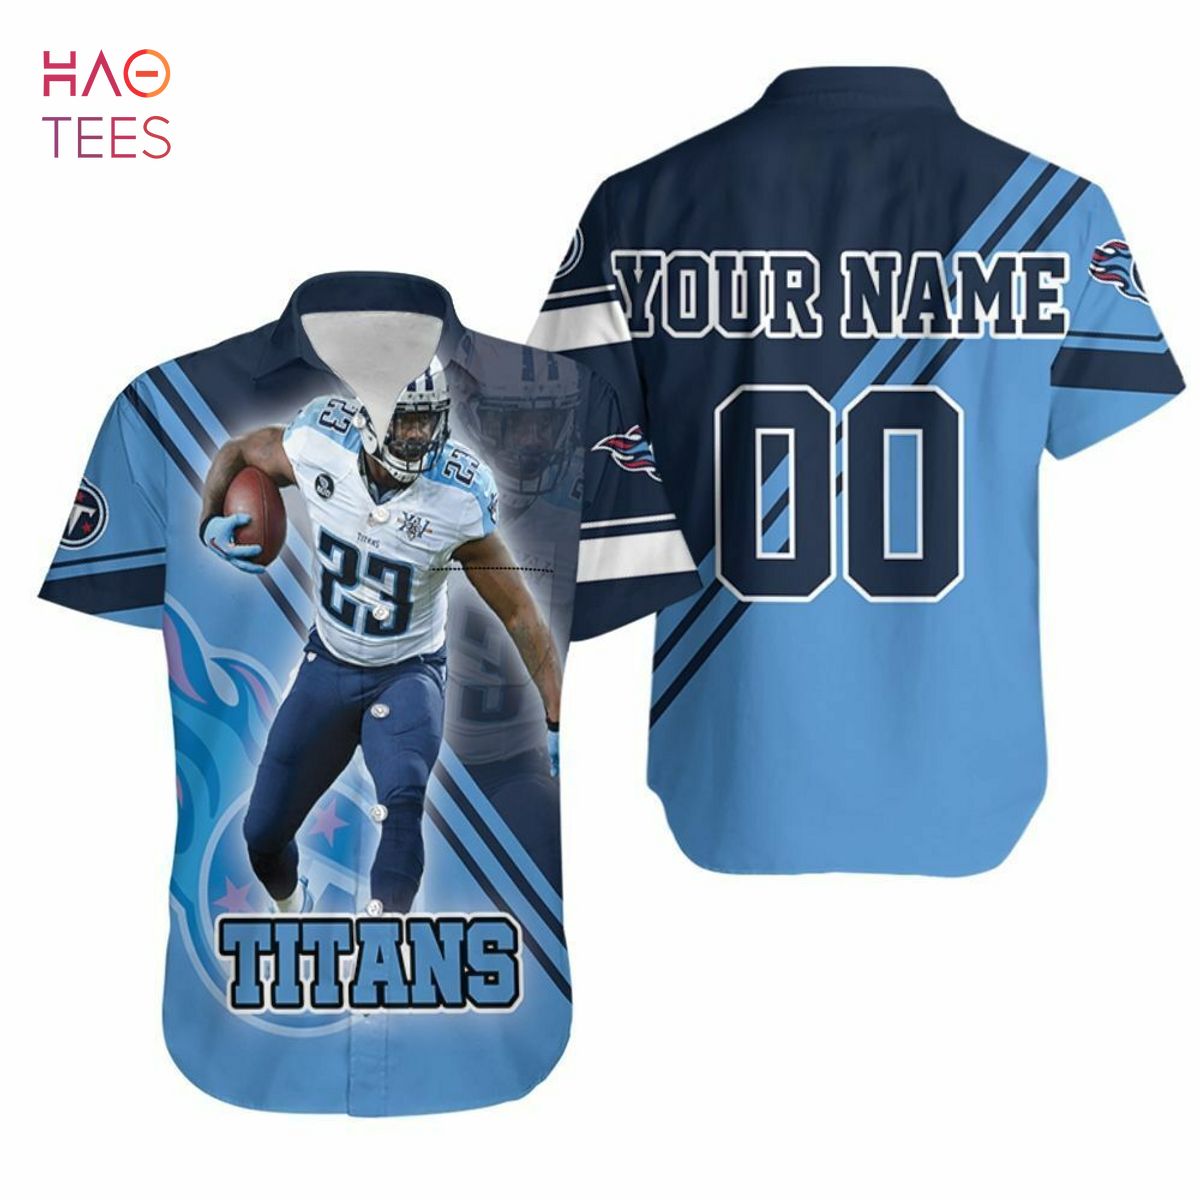 Tye Smith 23 Tennessee Titans Afc Division South Super Bowl 2021 Personalized Hawaiian Shirt